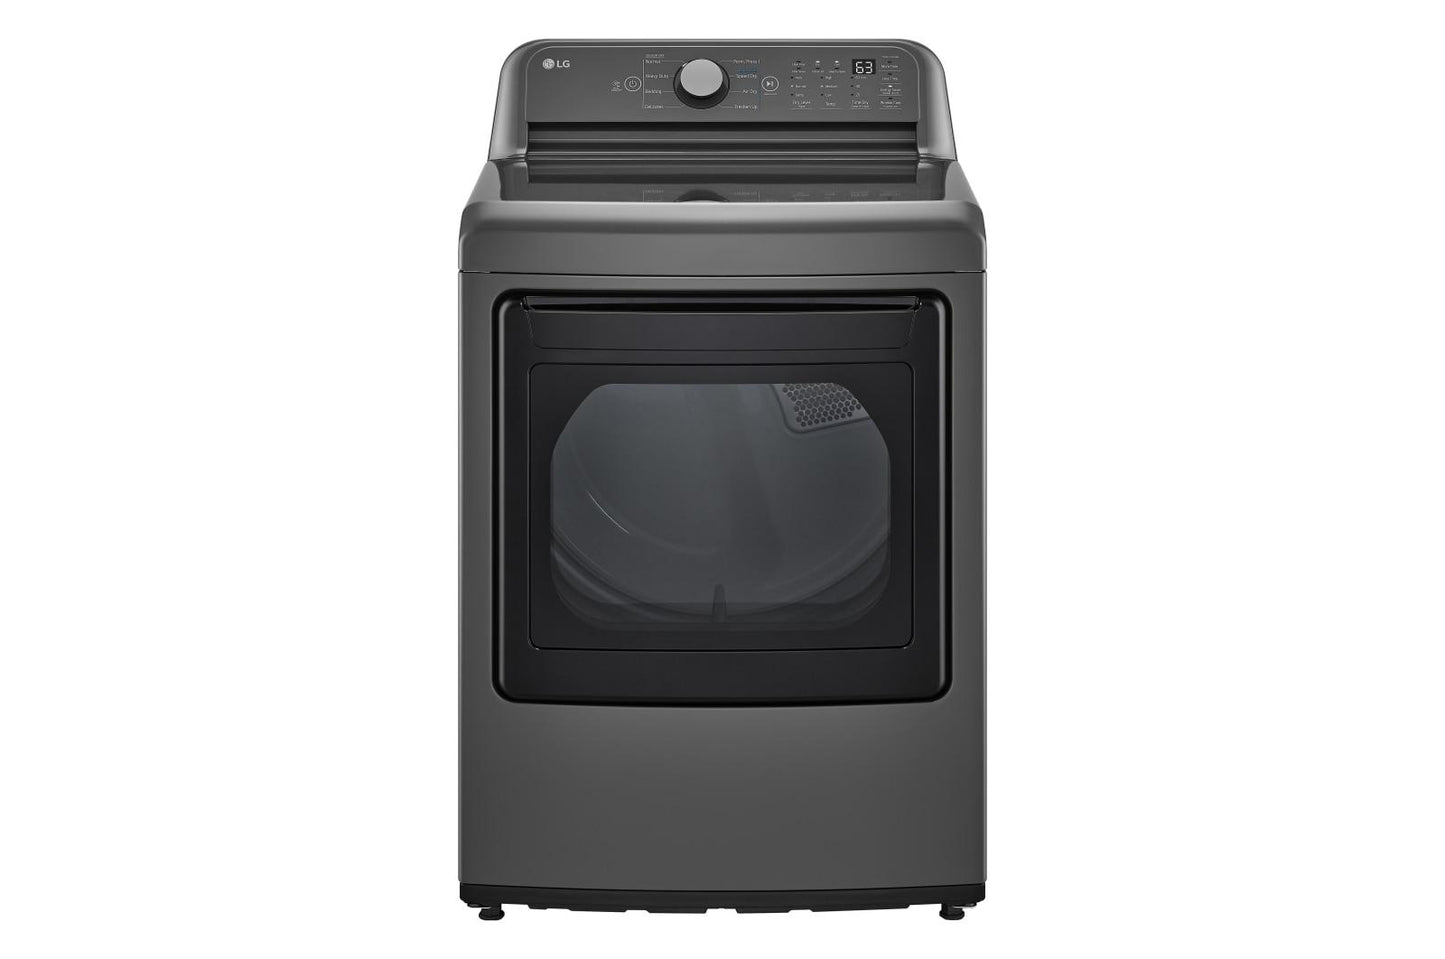 Lg DLG7151M 7.3 Cu. Ft. Top Load Energy Star Gas Dryer With Sensor Dry, Flowsense® & Clean Filter Indicators